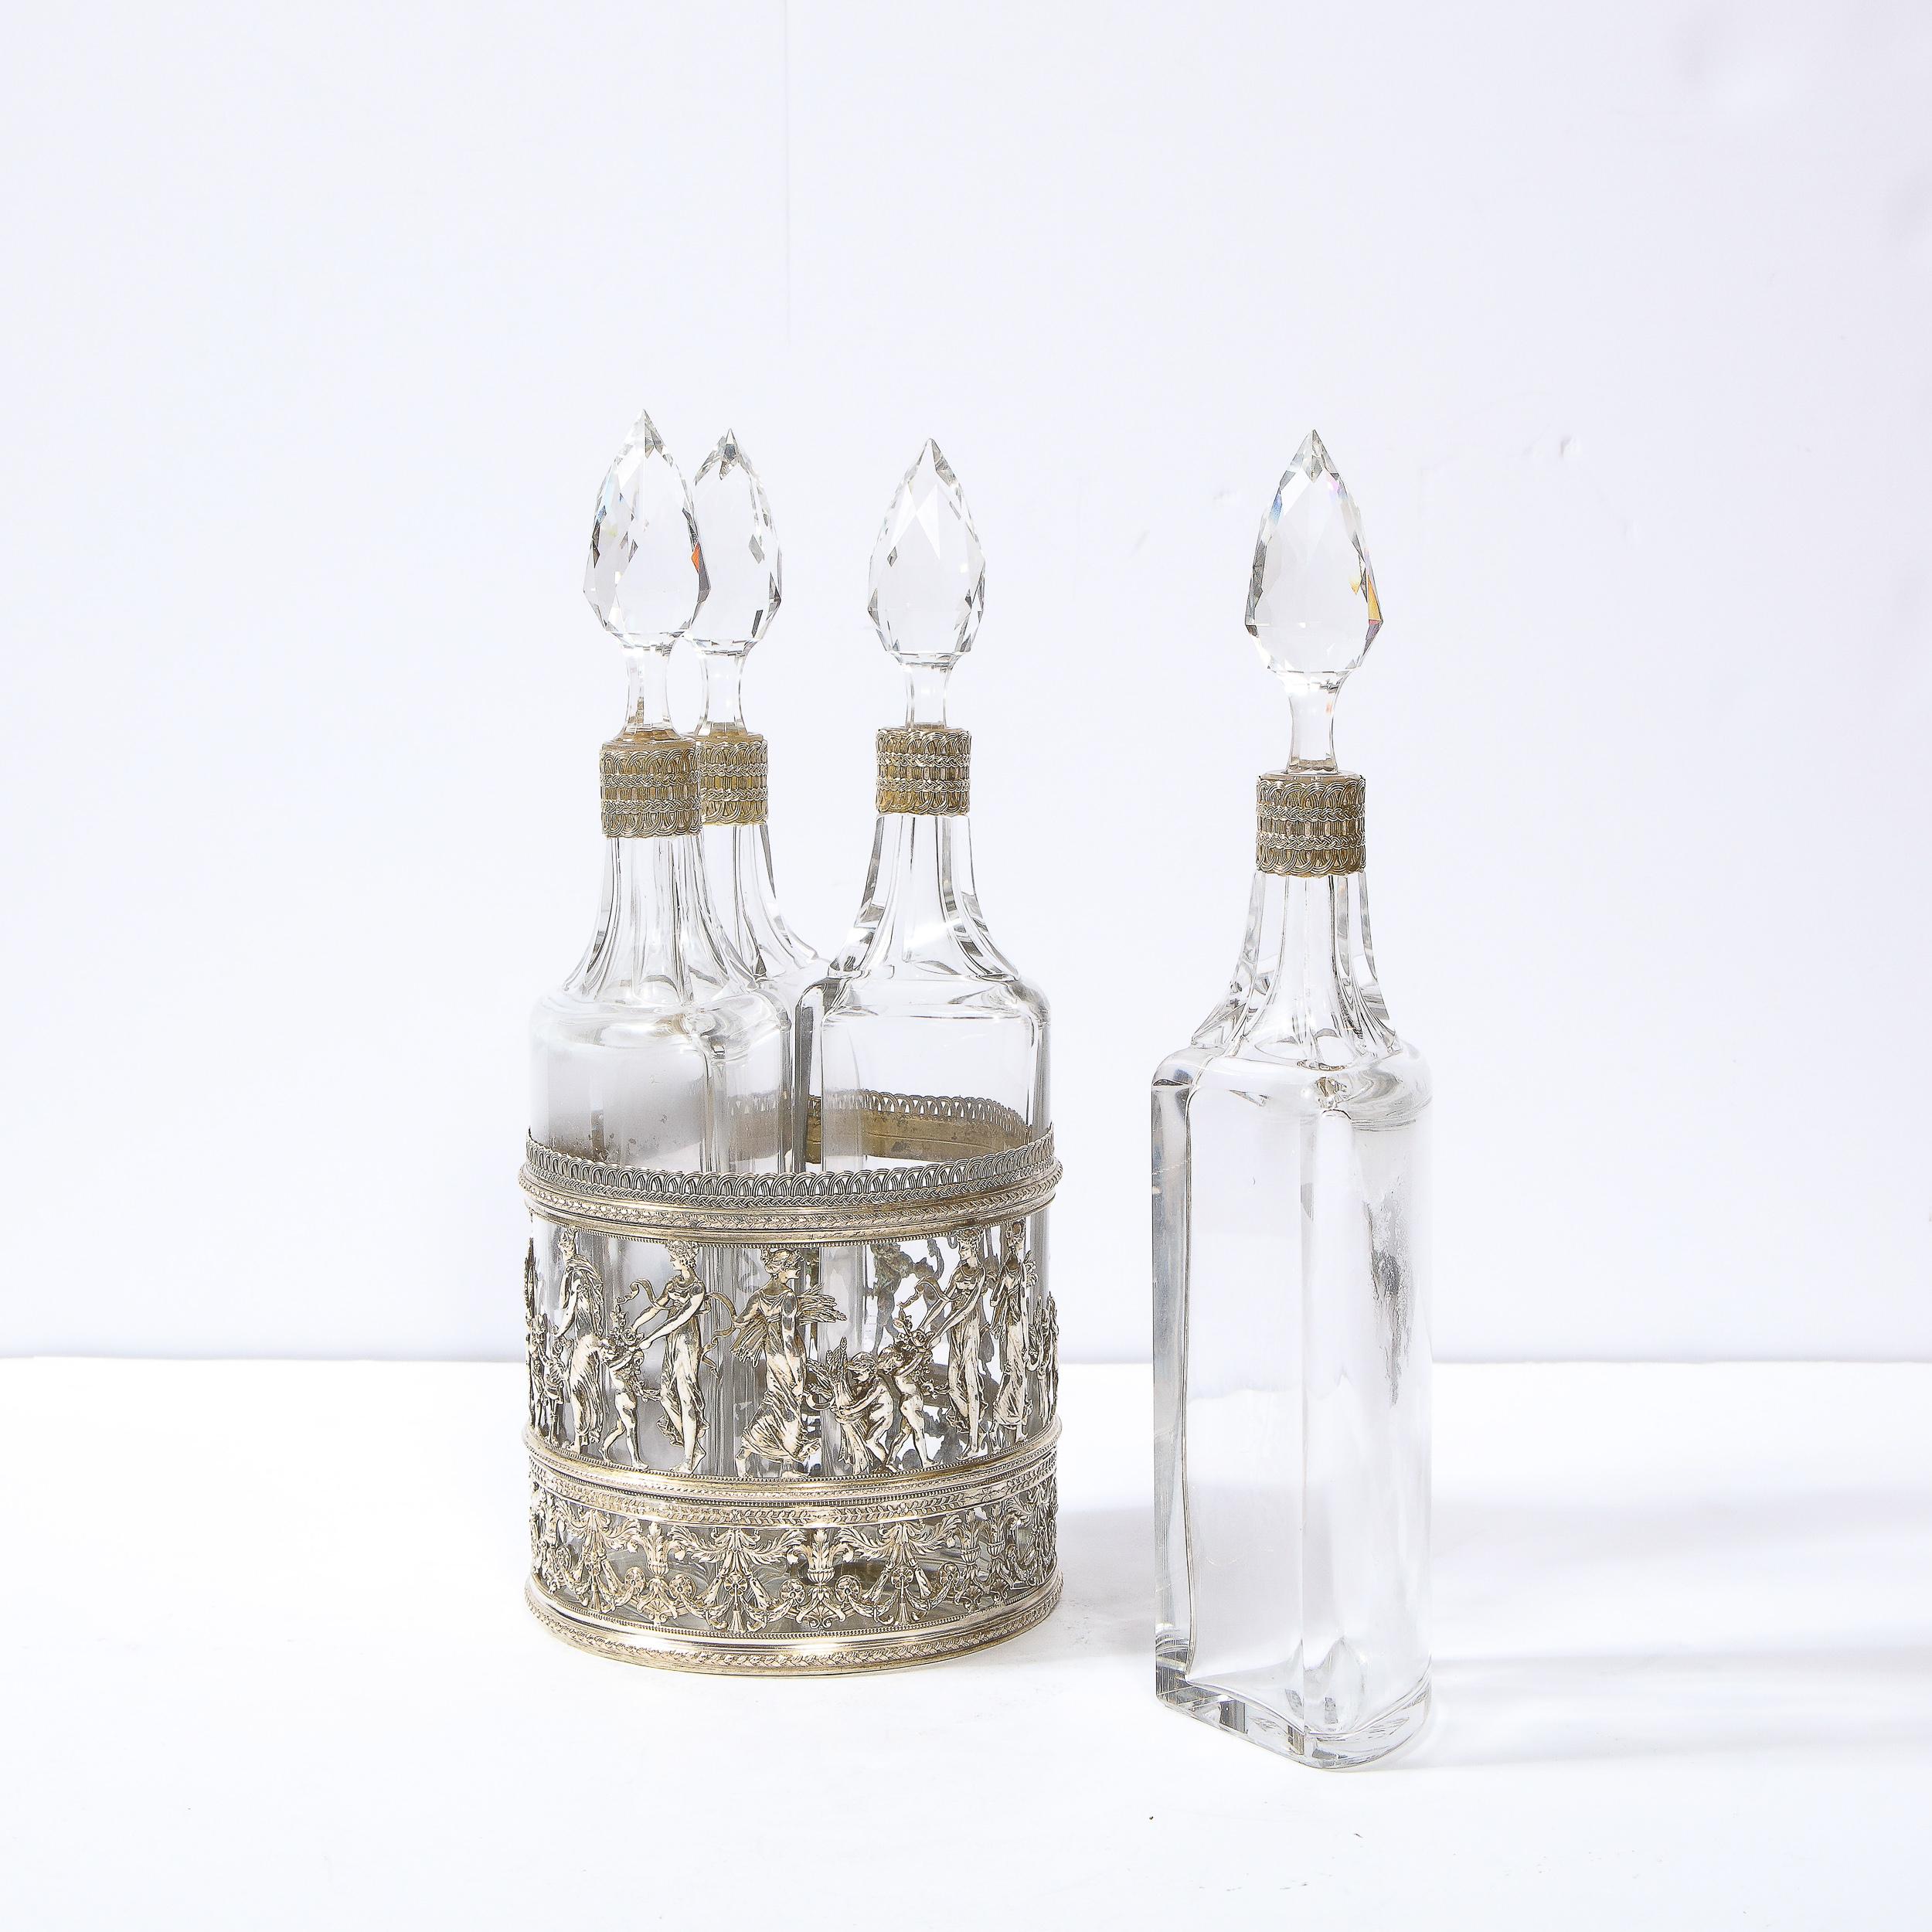 19th Century Neoclassical Figurative Silver Plate & Cut Crystal Decanter Set For Sale 4